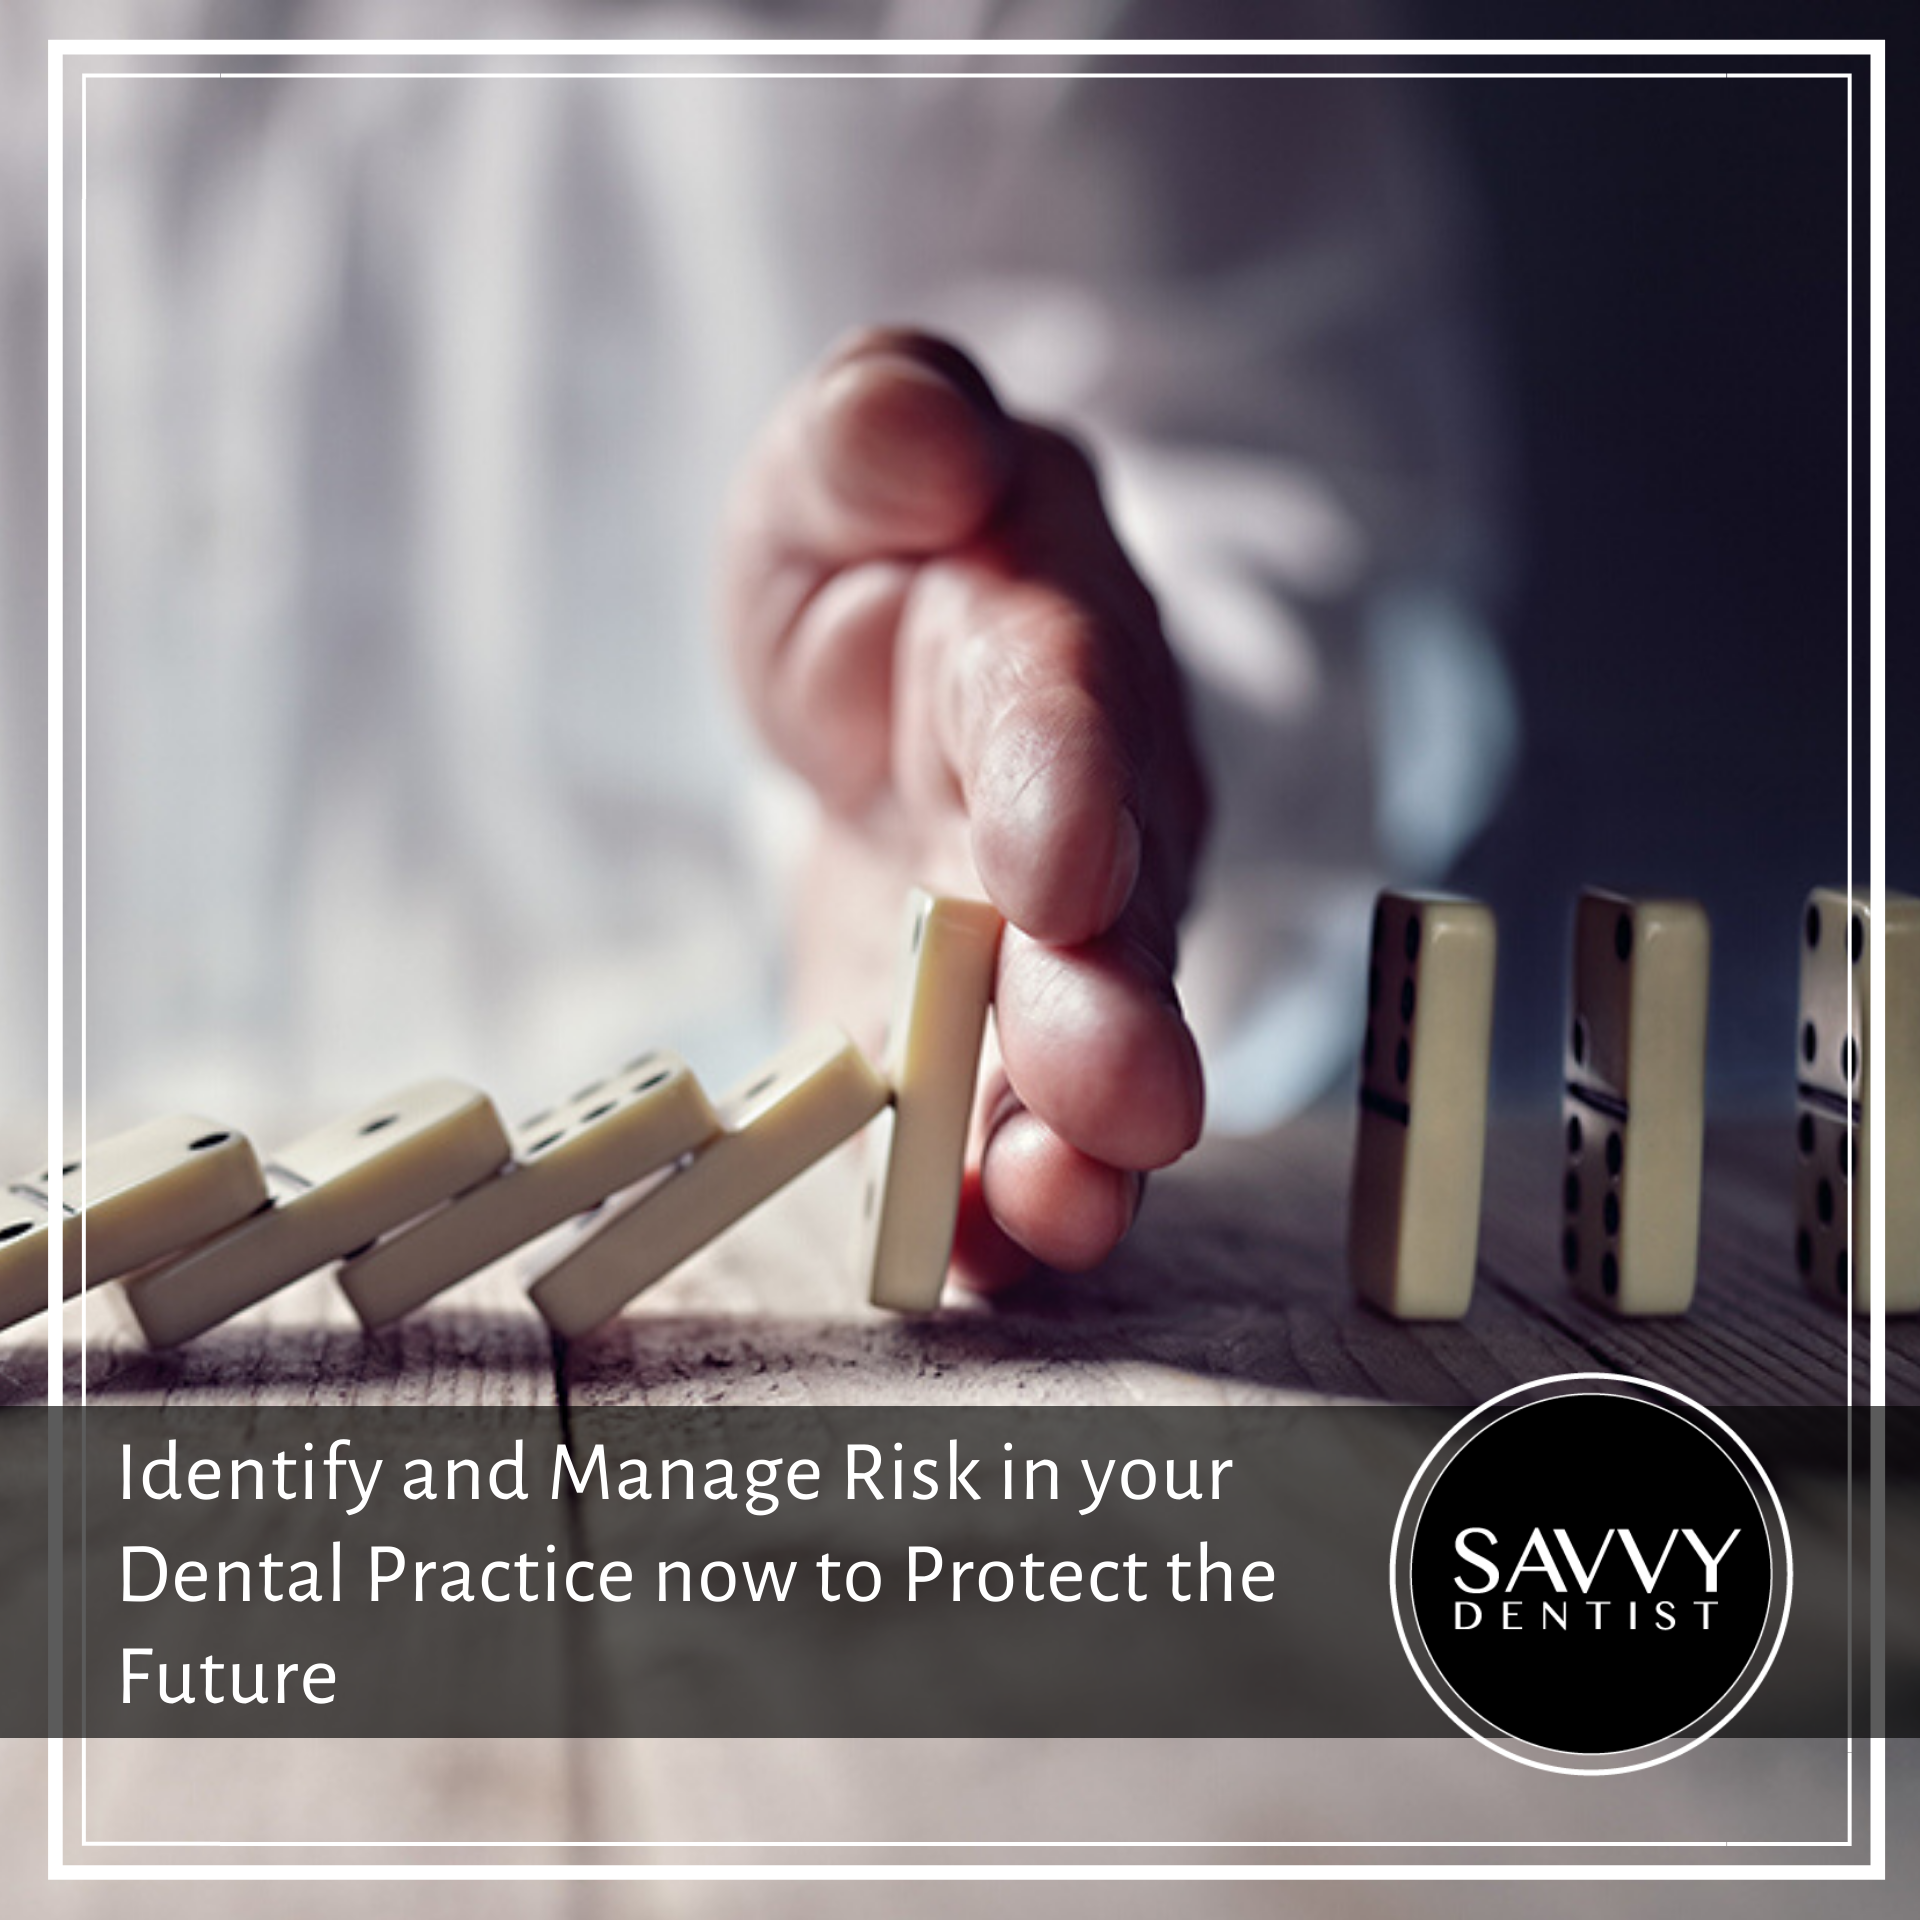 Identify And Manage Risk In Your Dental Practice Now to Protect the Future